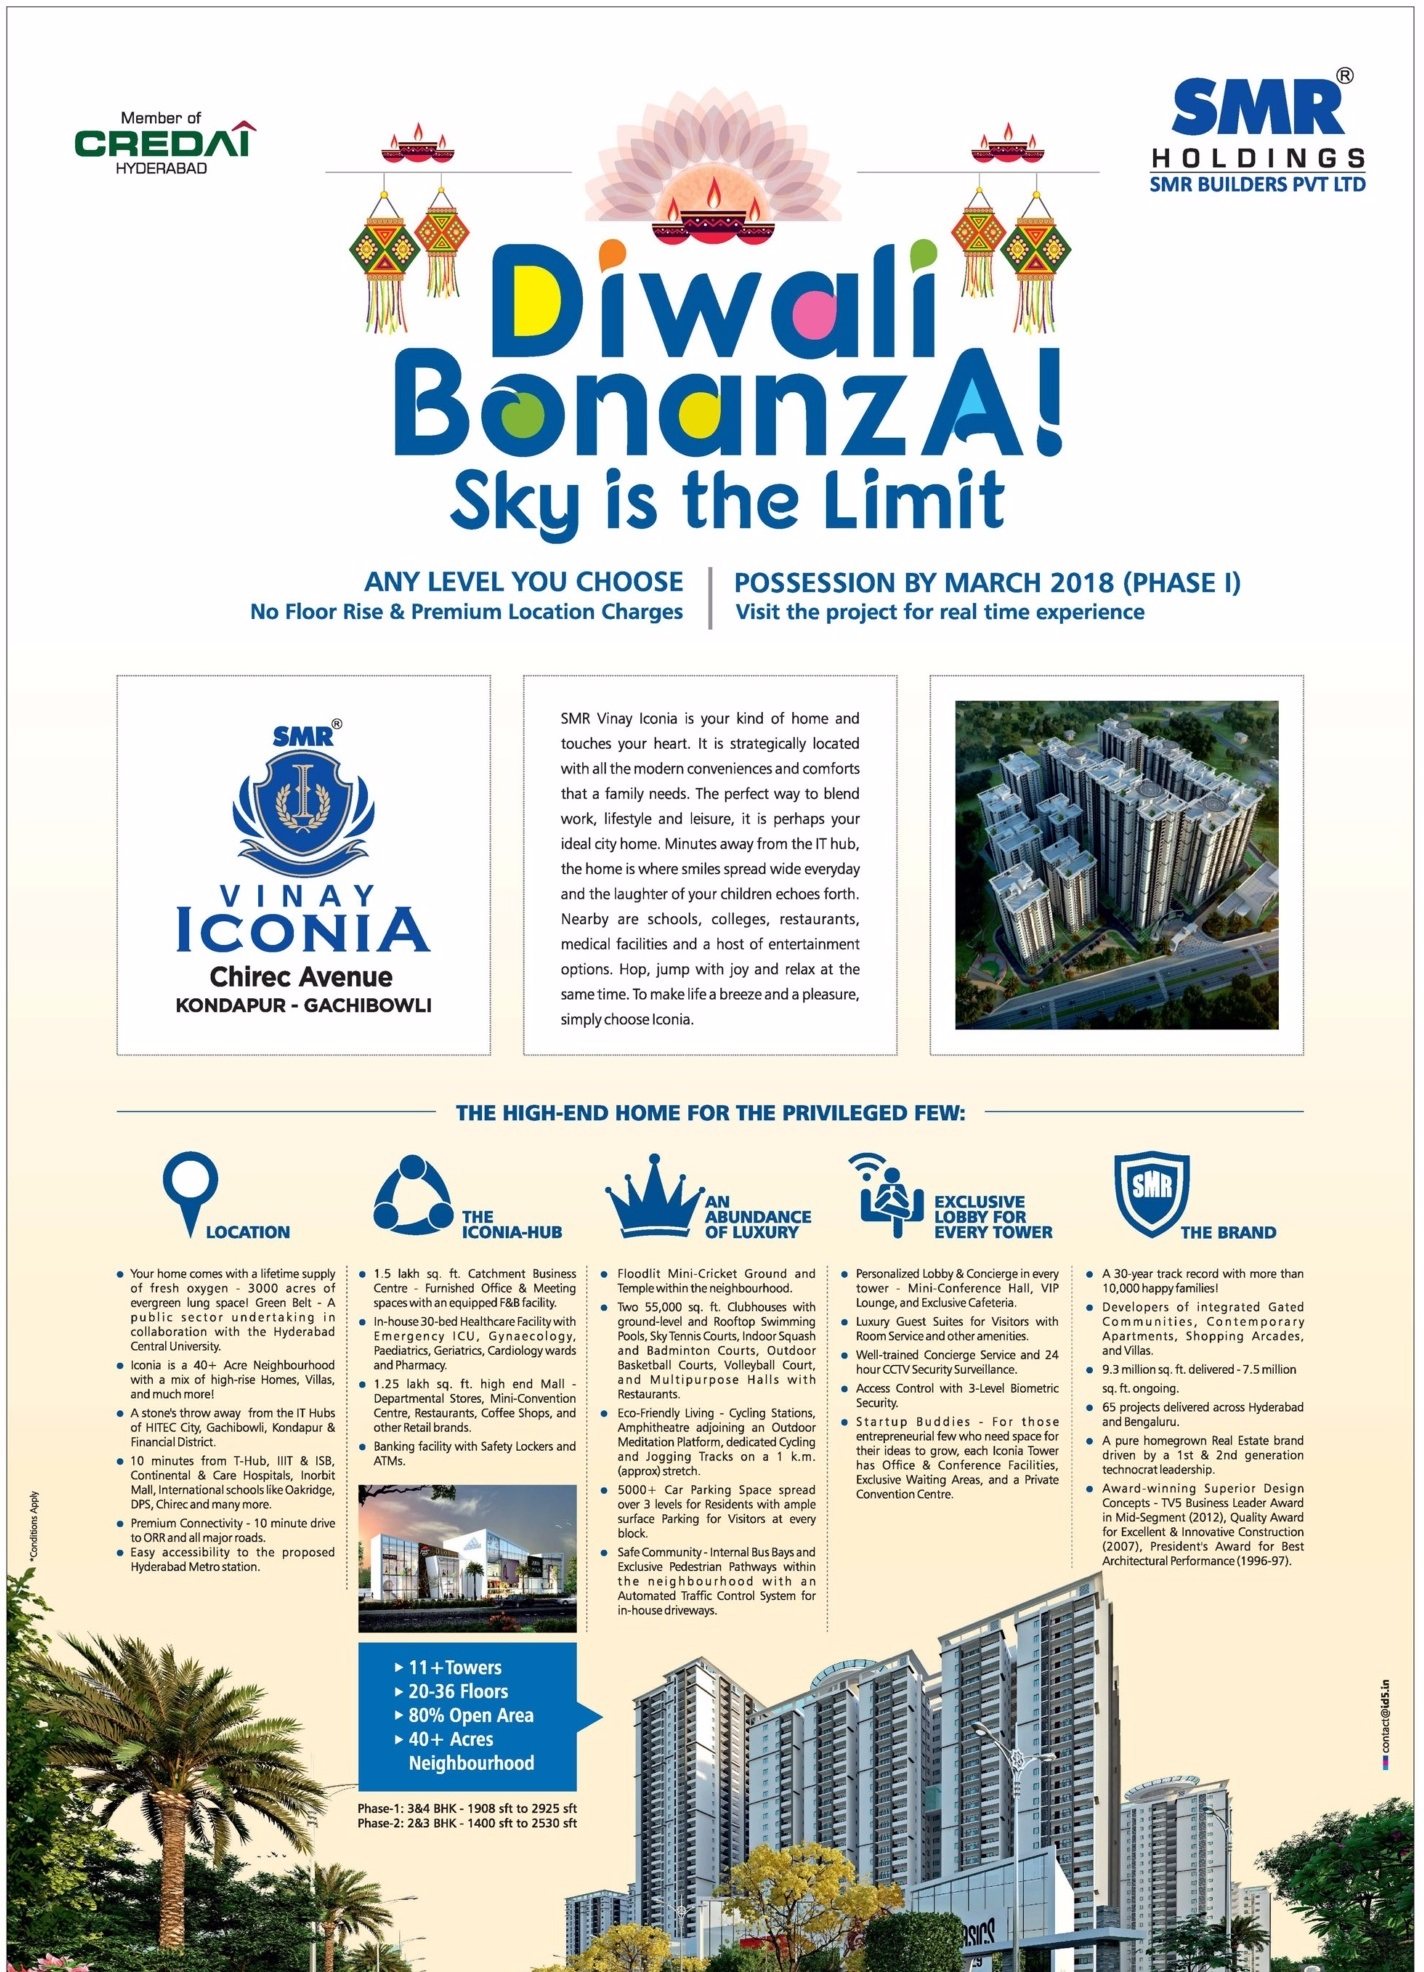 Sky is the limit during Diwali Bonanza Offer at SMR Vinay Iconia in Hyderabad